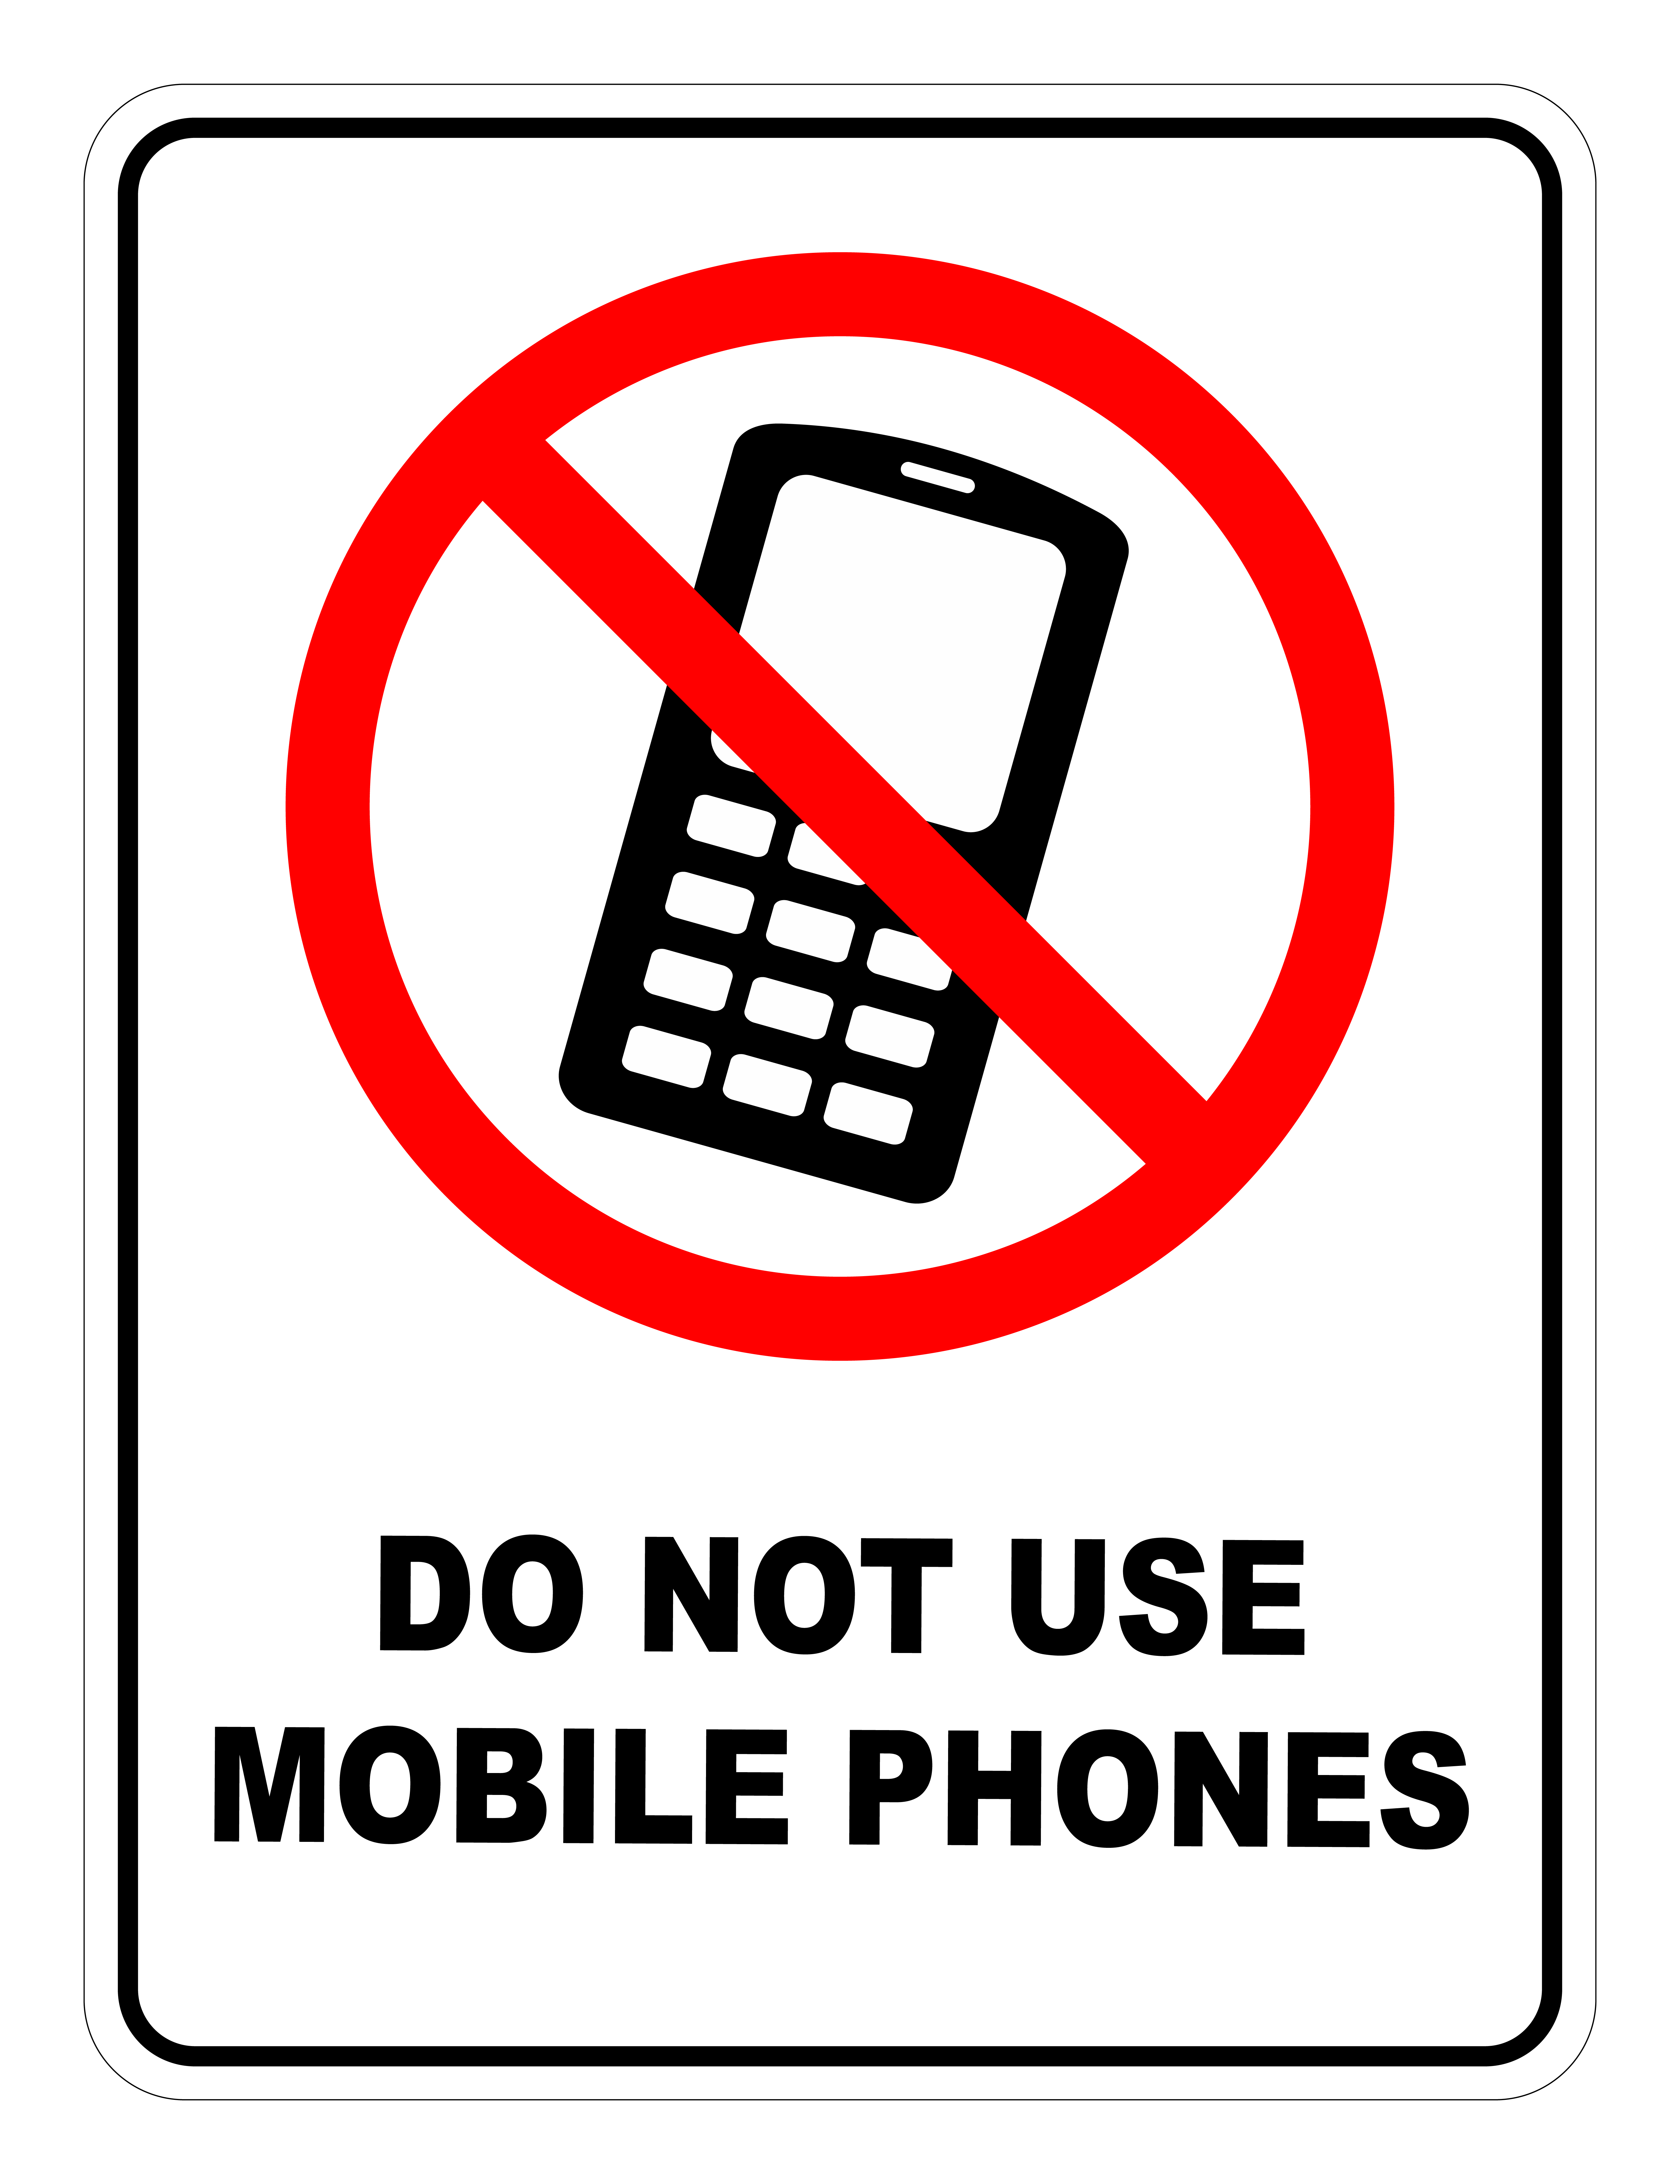 Mobile phones are forbidden in this area safety sign 